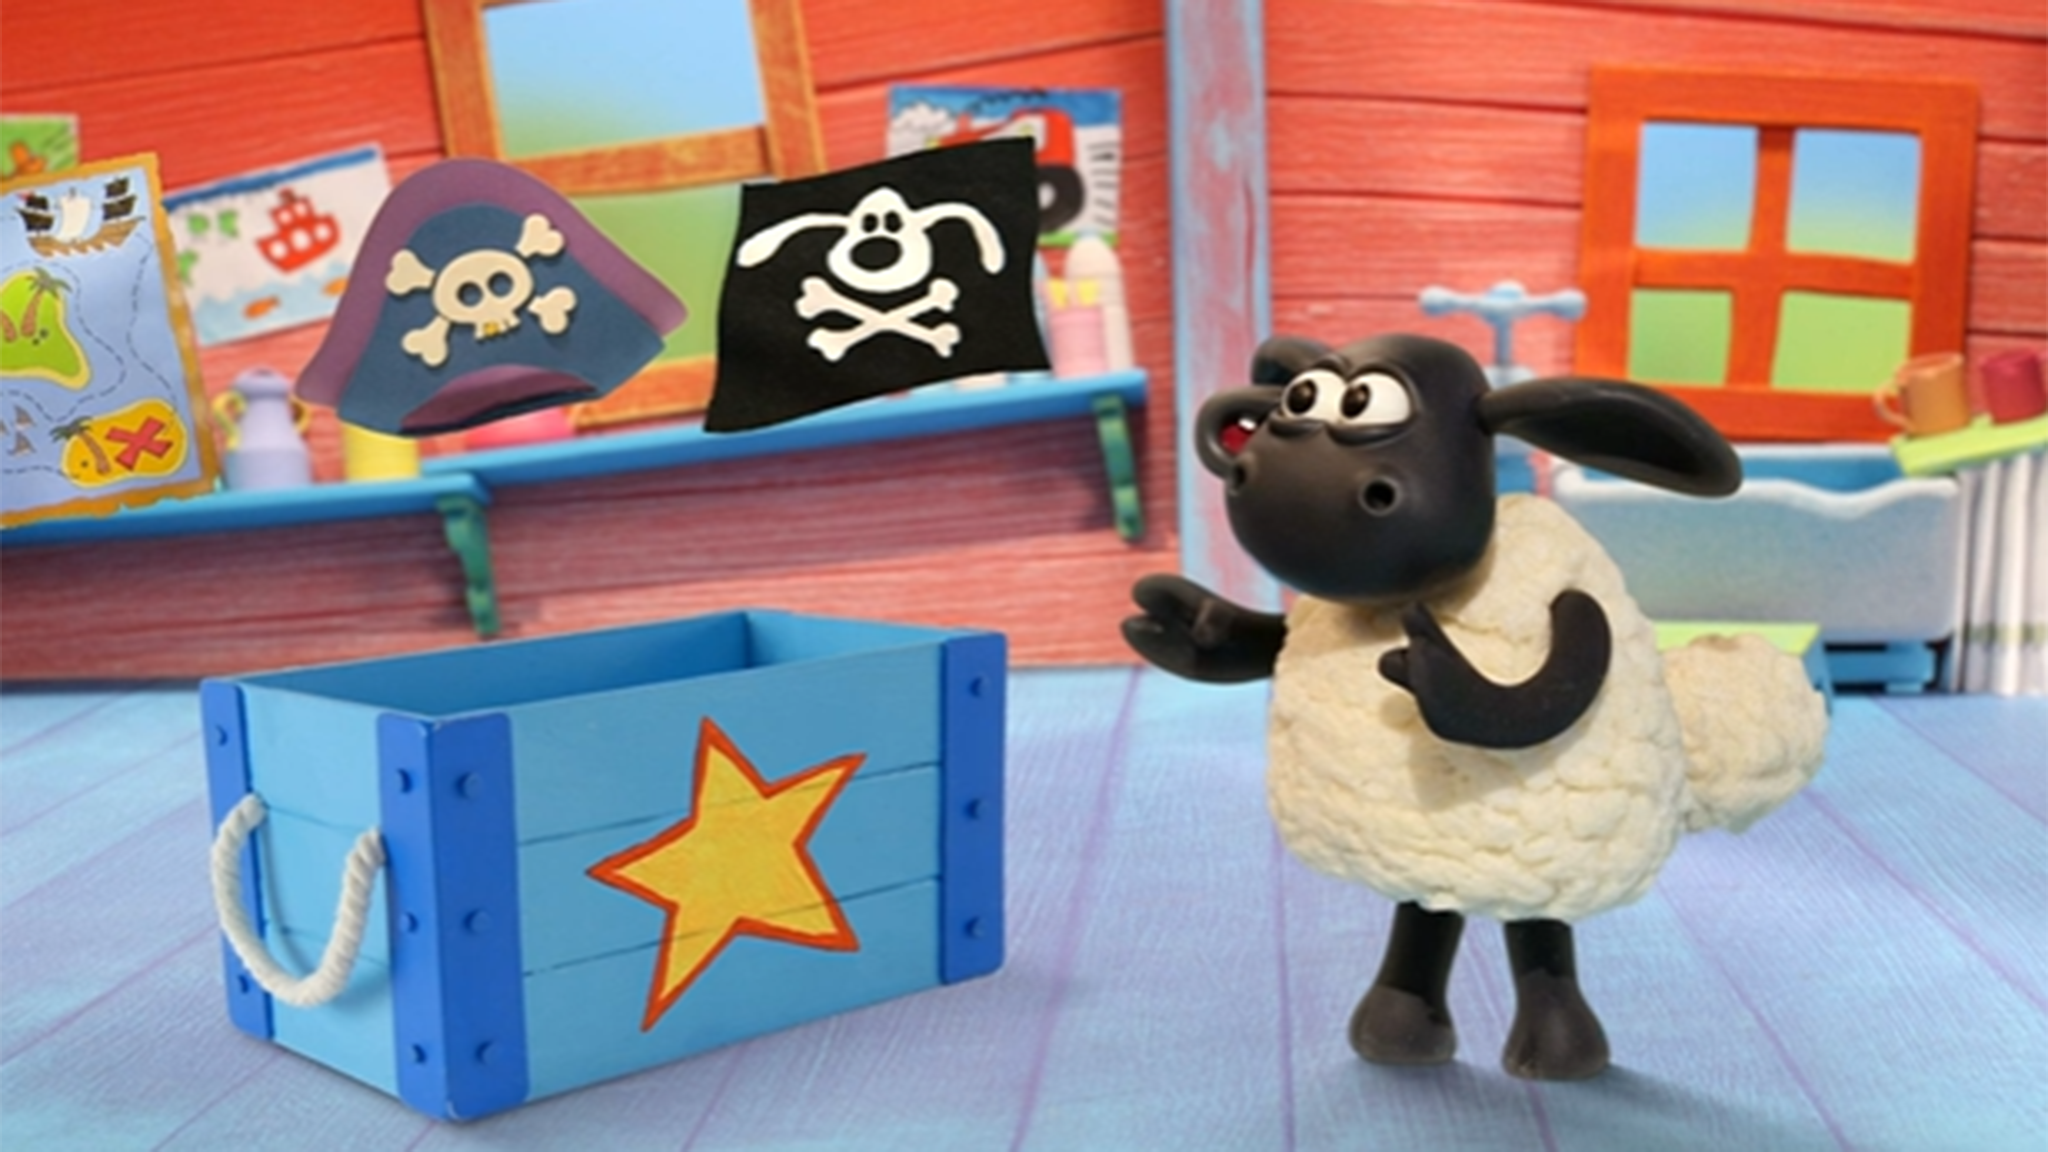 Learning time with Timmy - S1E21 - Trova il tesoro